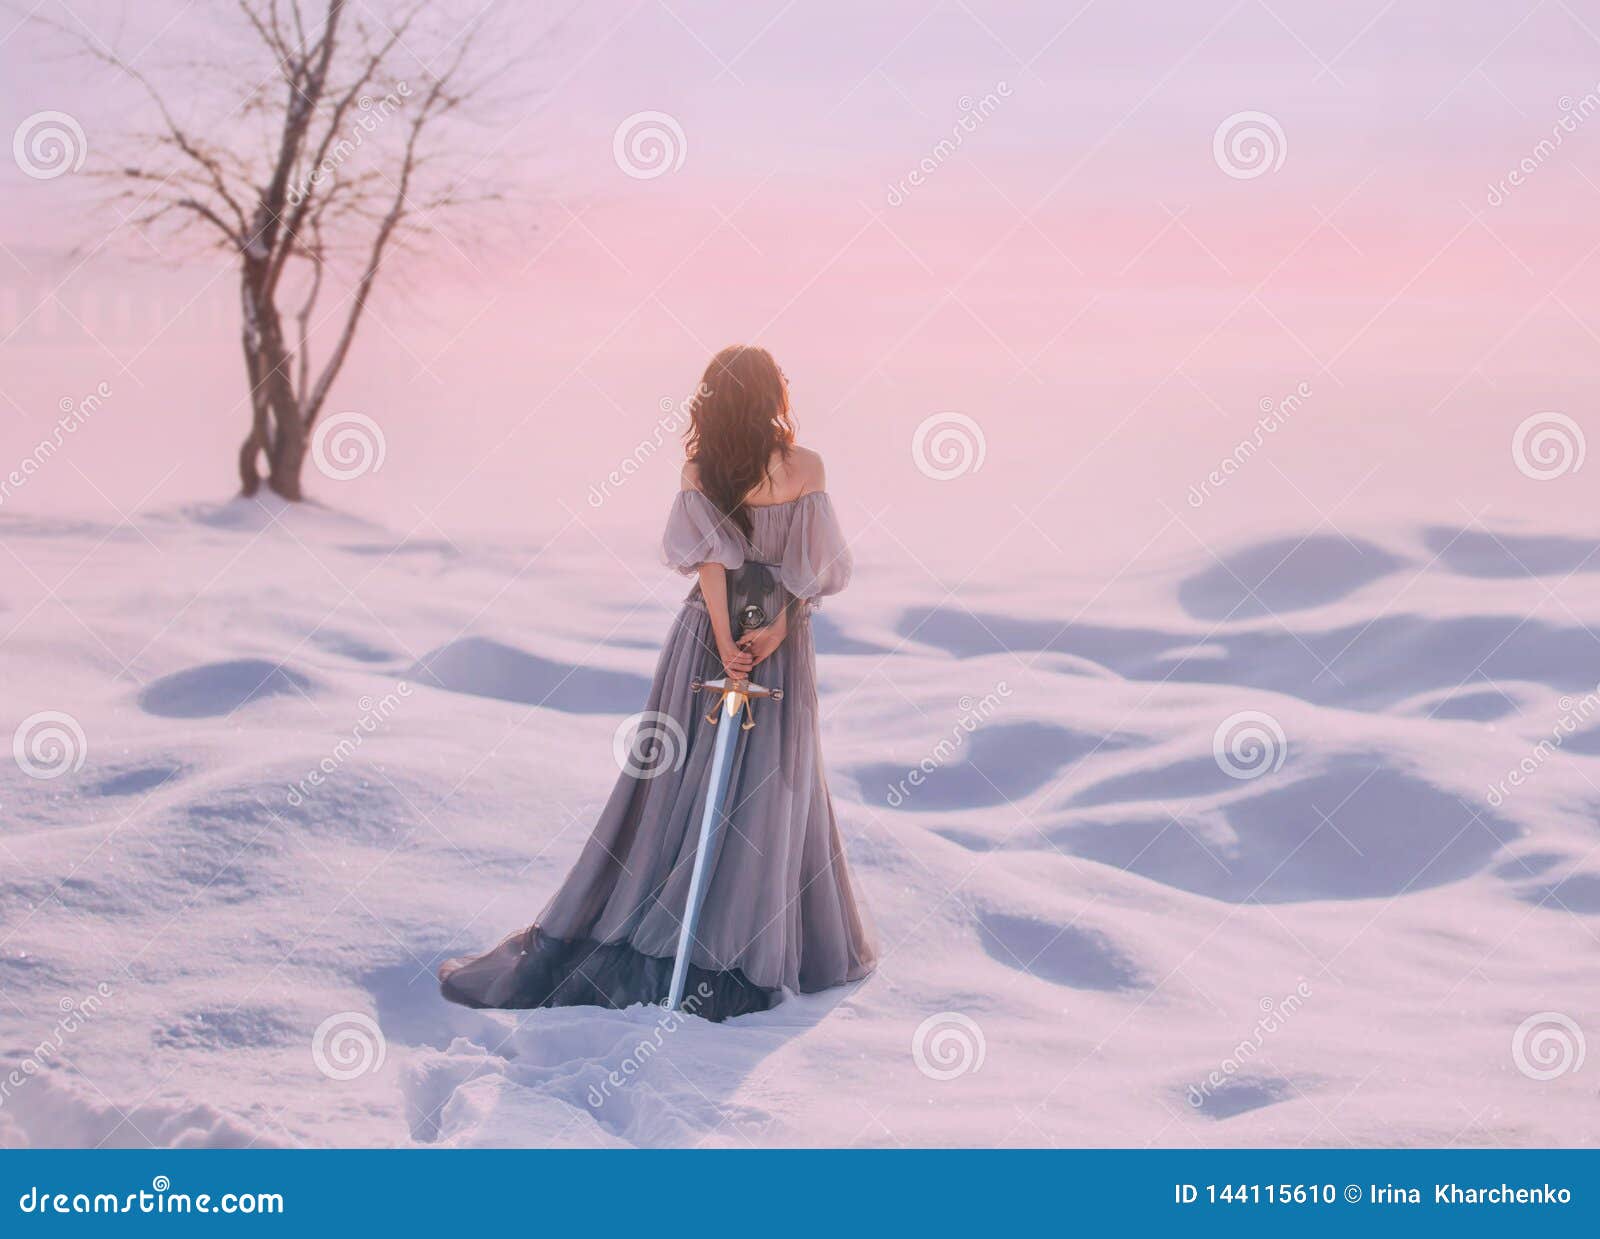 mysterious lady from middle ages with dark hair in gentle gray blue dress in snowy desert with open back and shoulders